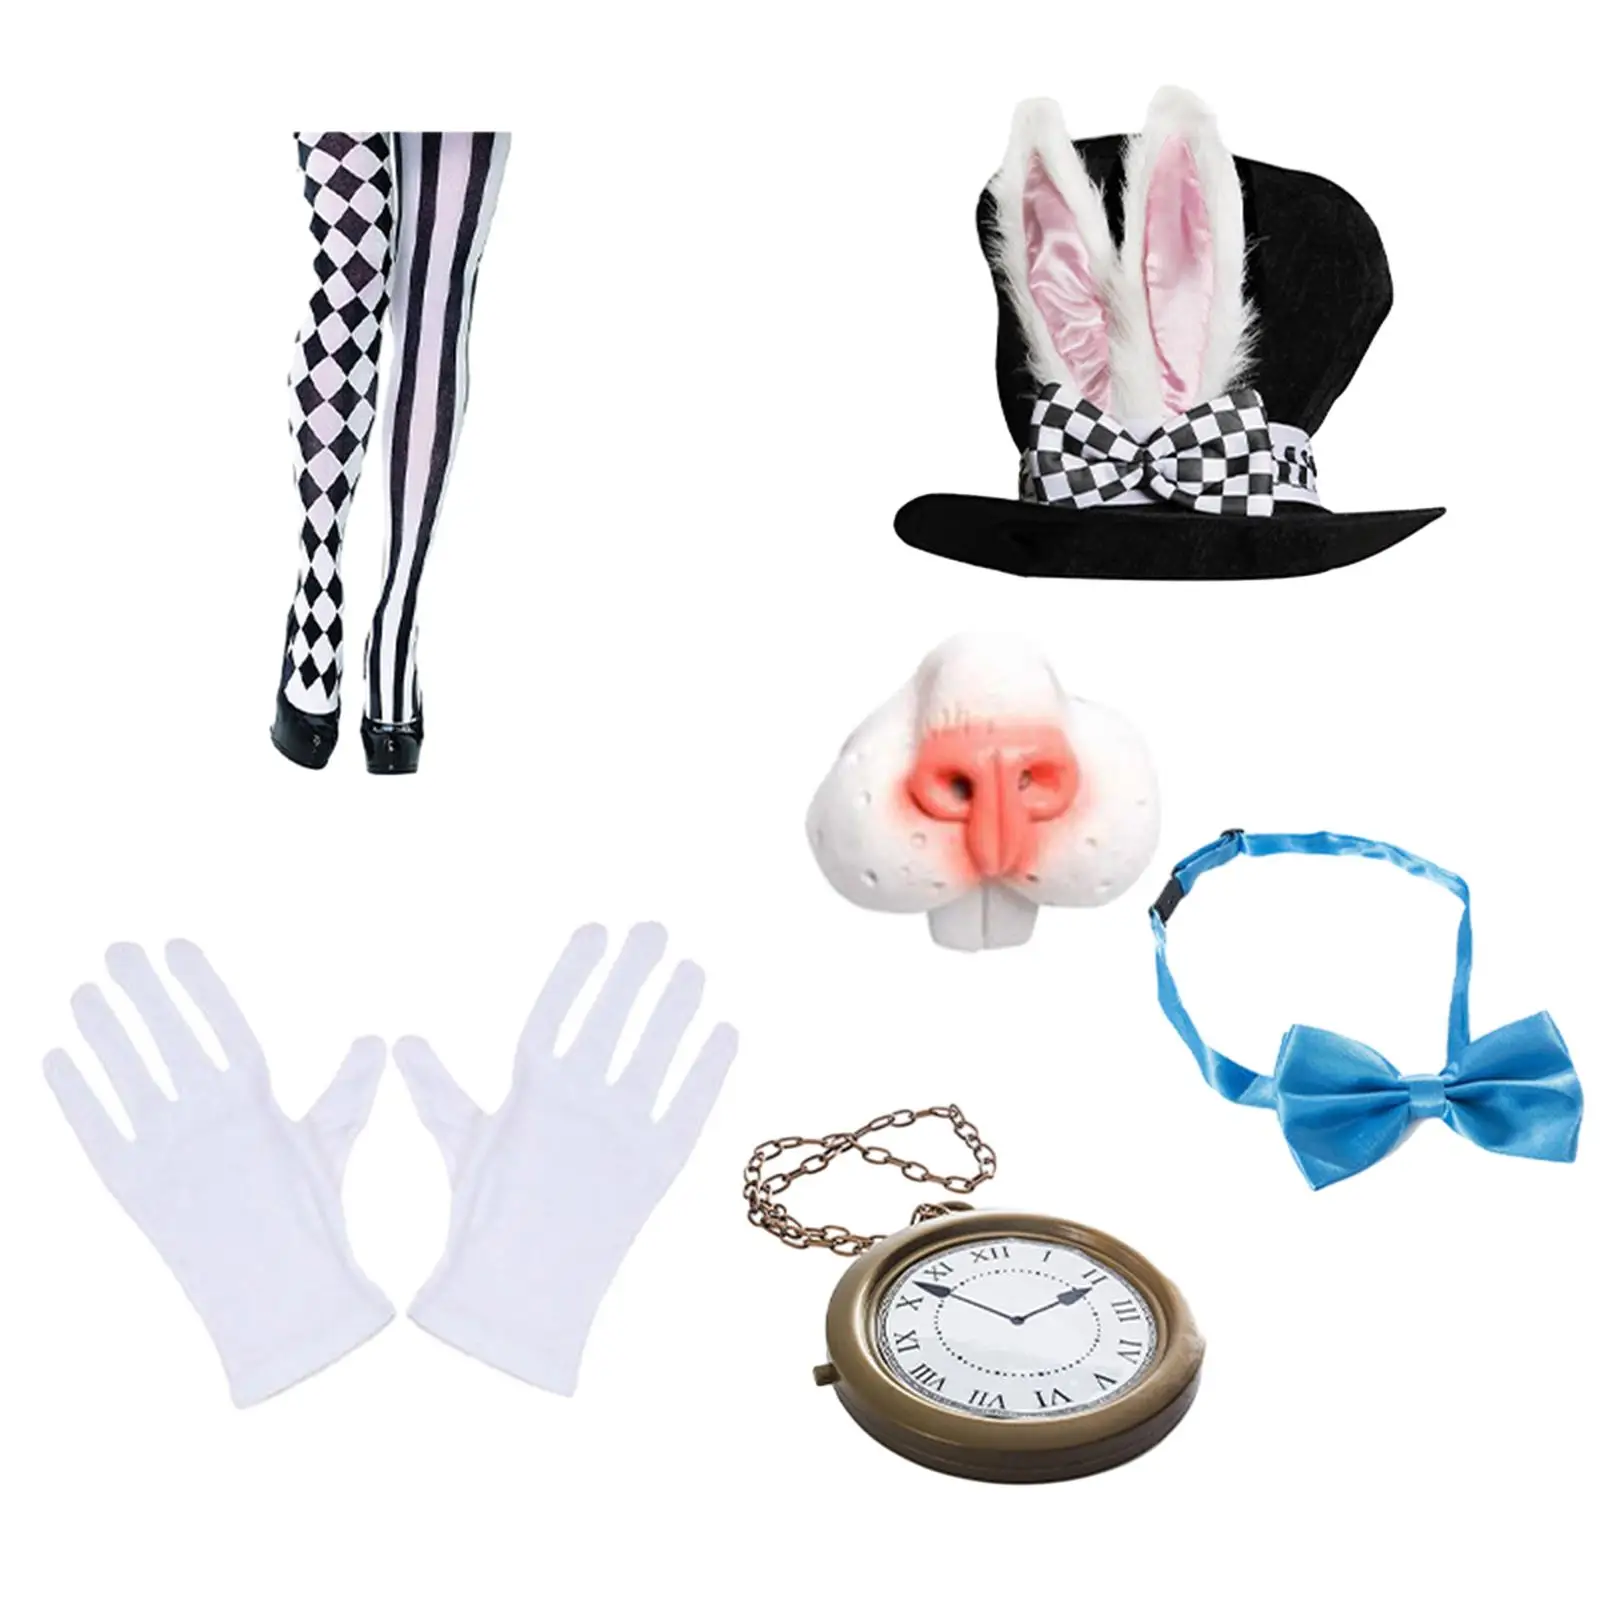 

Easter Costume Set Creative Roles Play Gloves Socks for Carnivals Easter Decorations Stage Show Themed Parties Masquerade